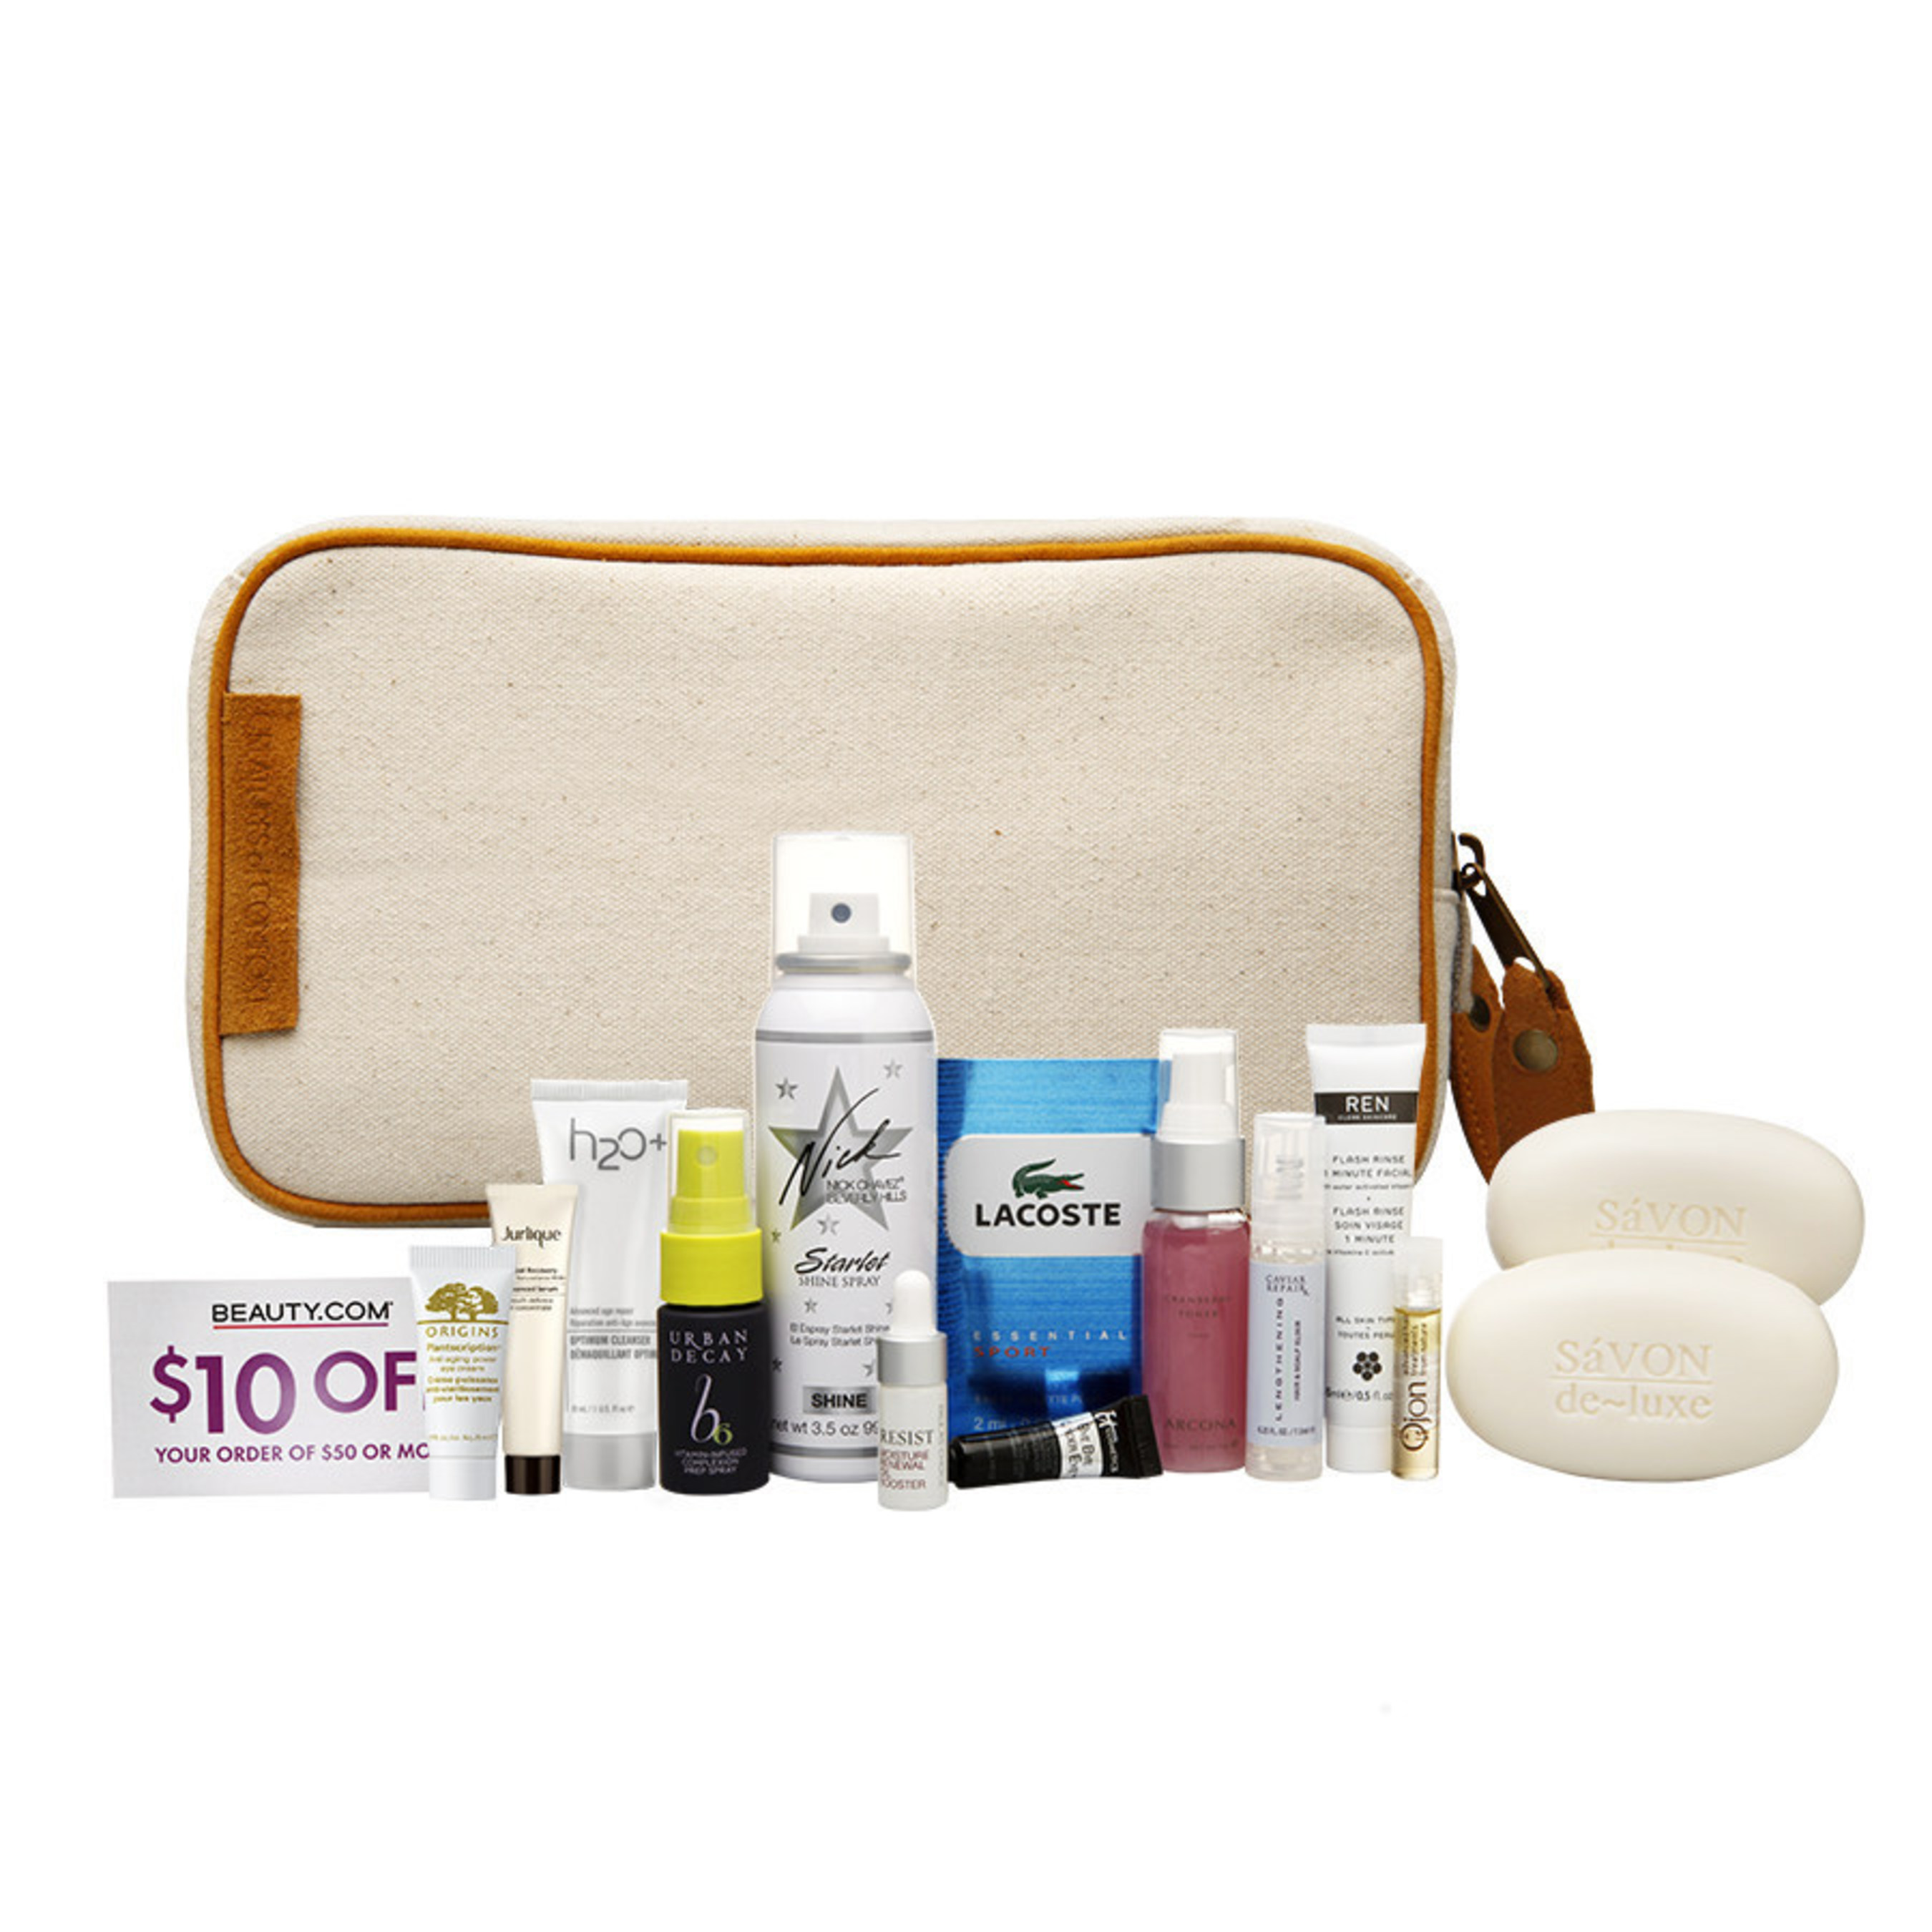 Beauty.com Debuts the Creatures of Comfort Creatures Dopp Kit as Gift with Purchase